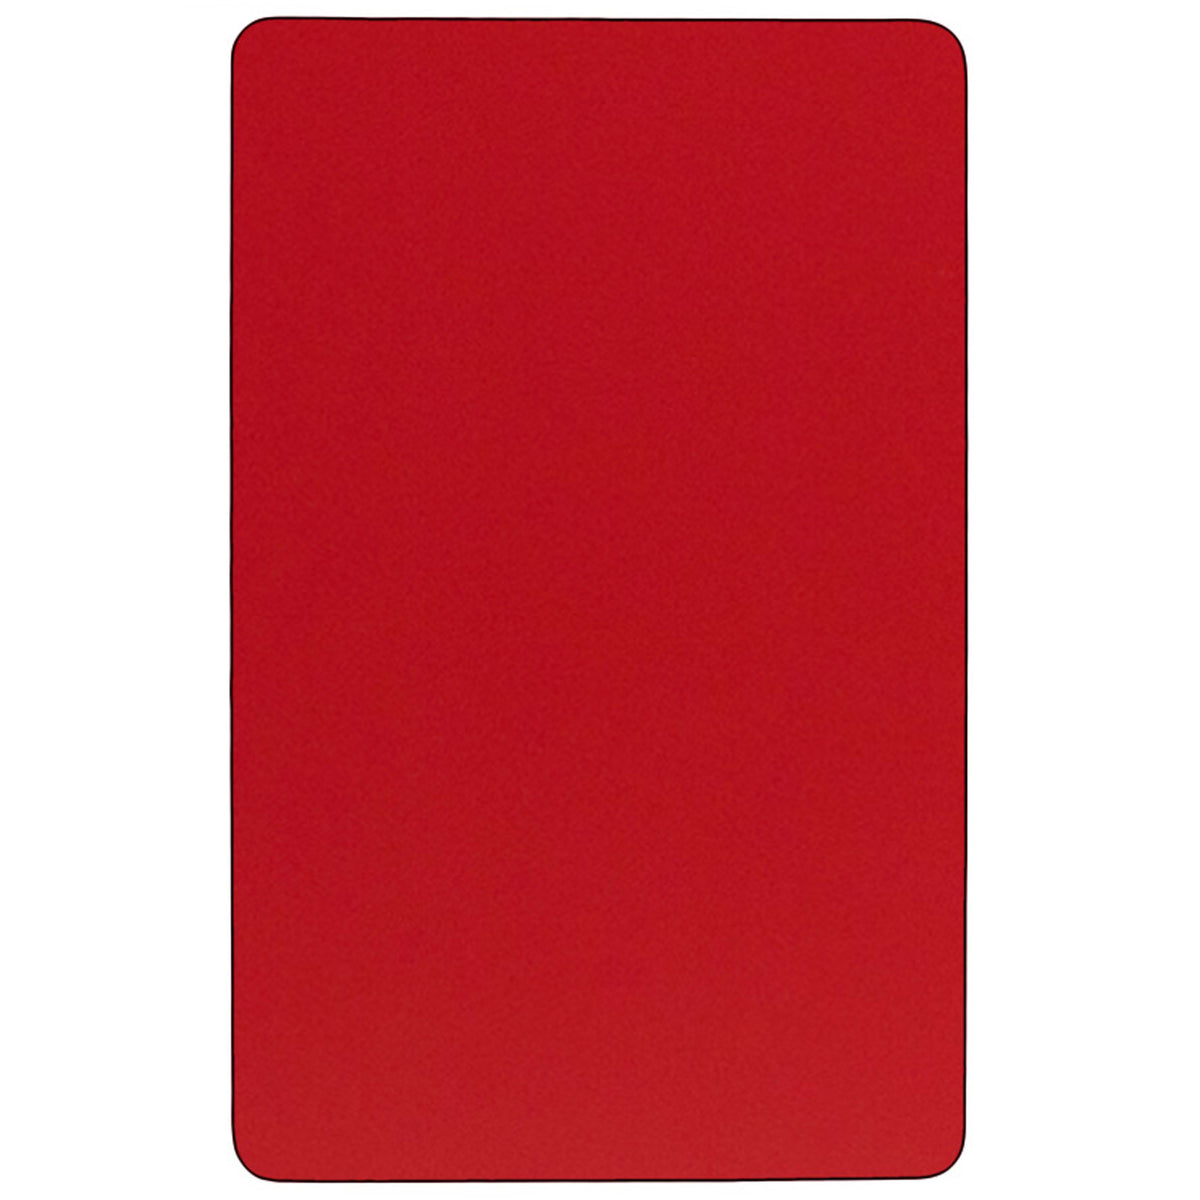 Red |#| 30inchW x 72inchL Rectangular Red HP Laminate Activity Table - Height Adjustable Legs